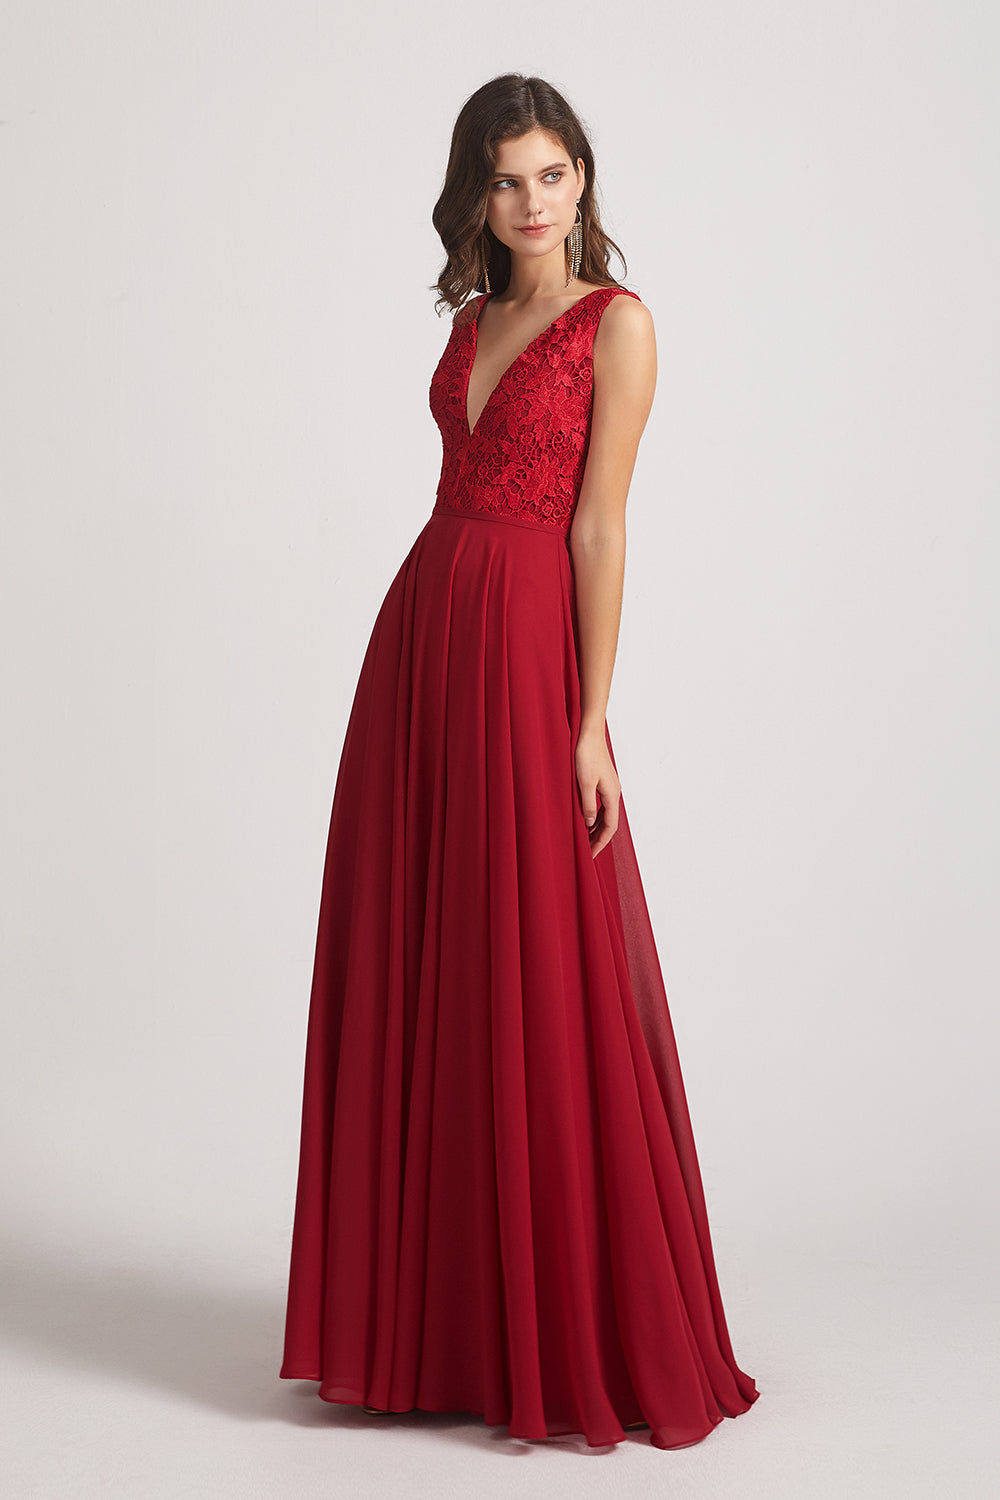 deep v-neck lace top long dresses for bridesmaid